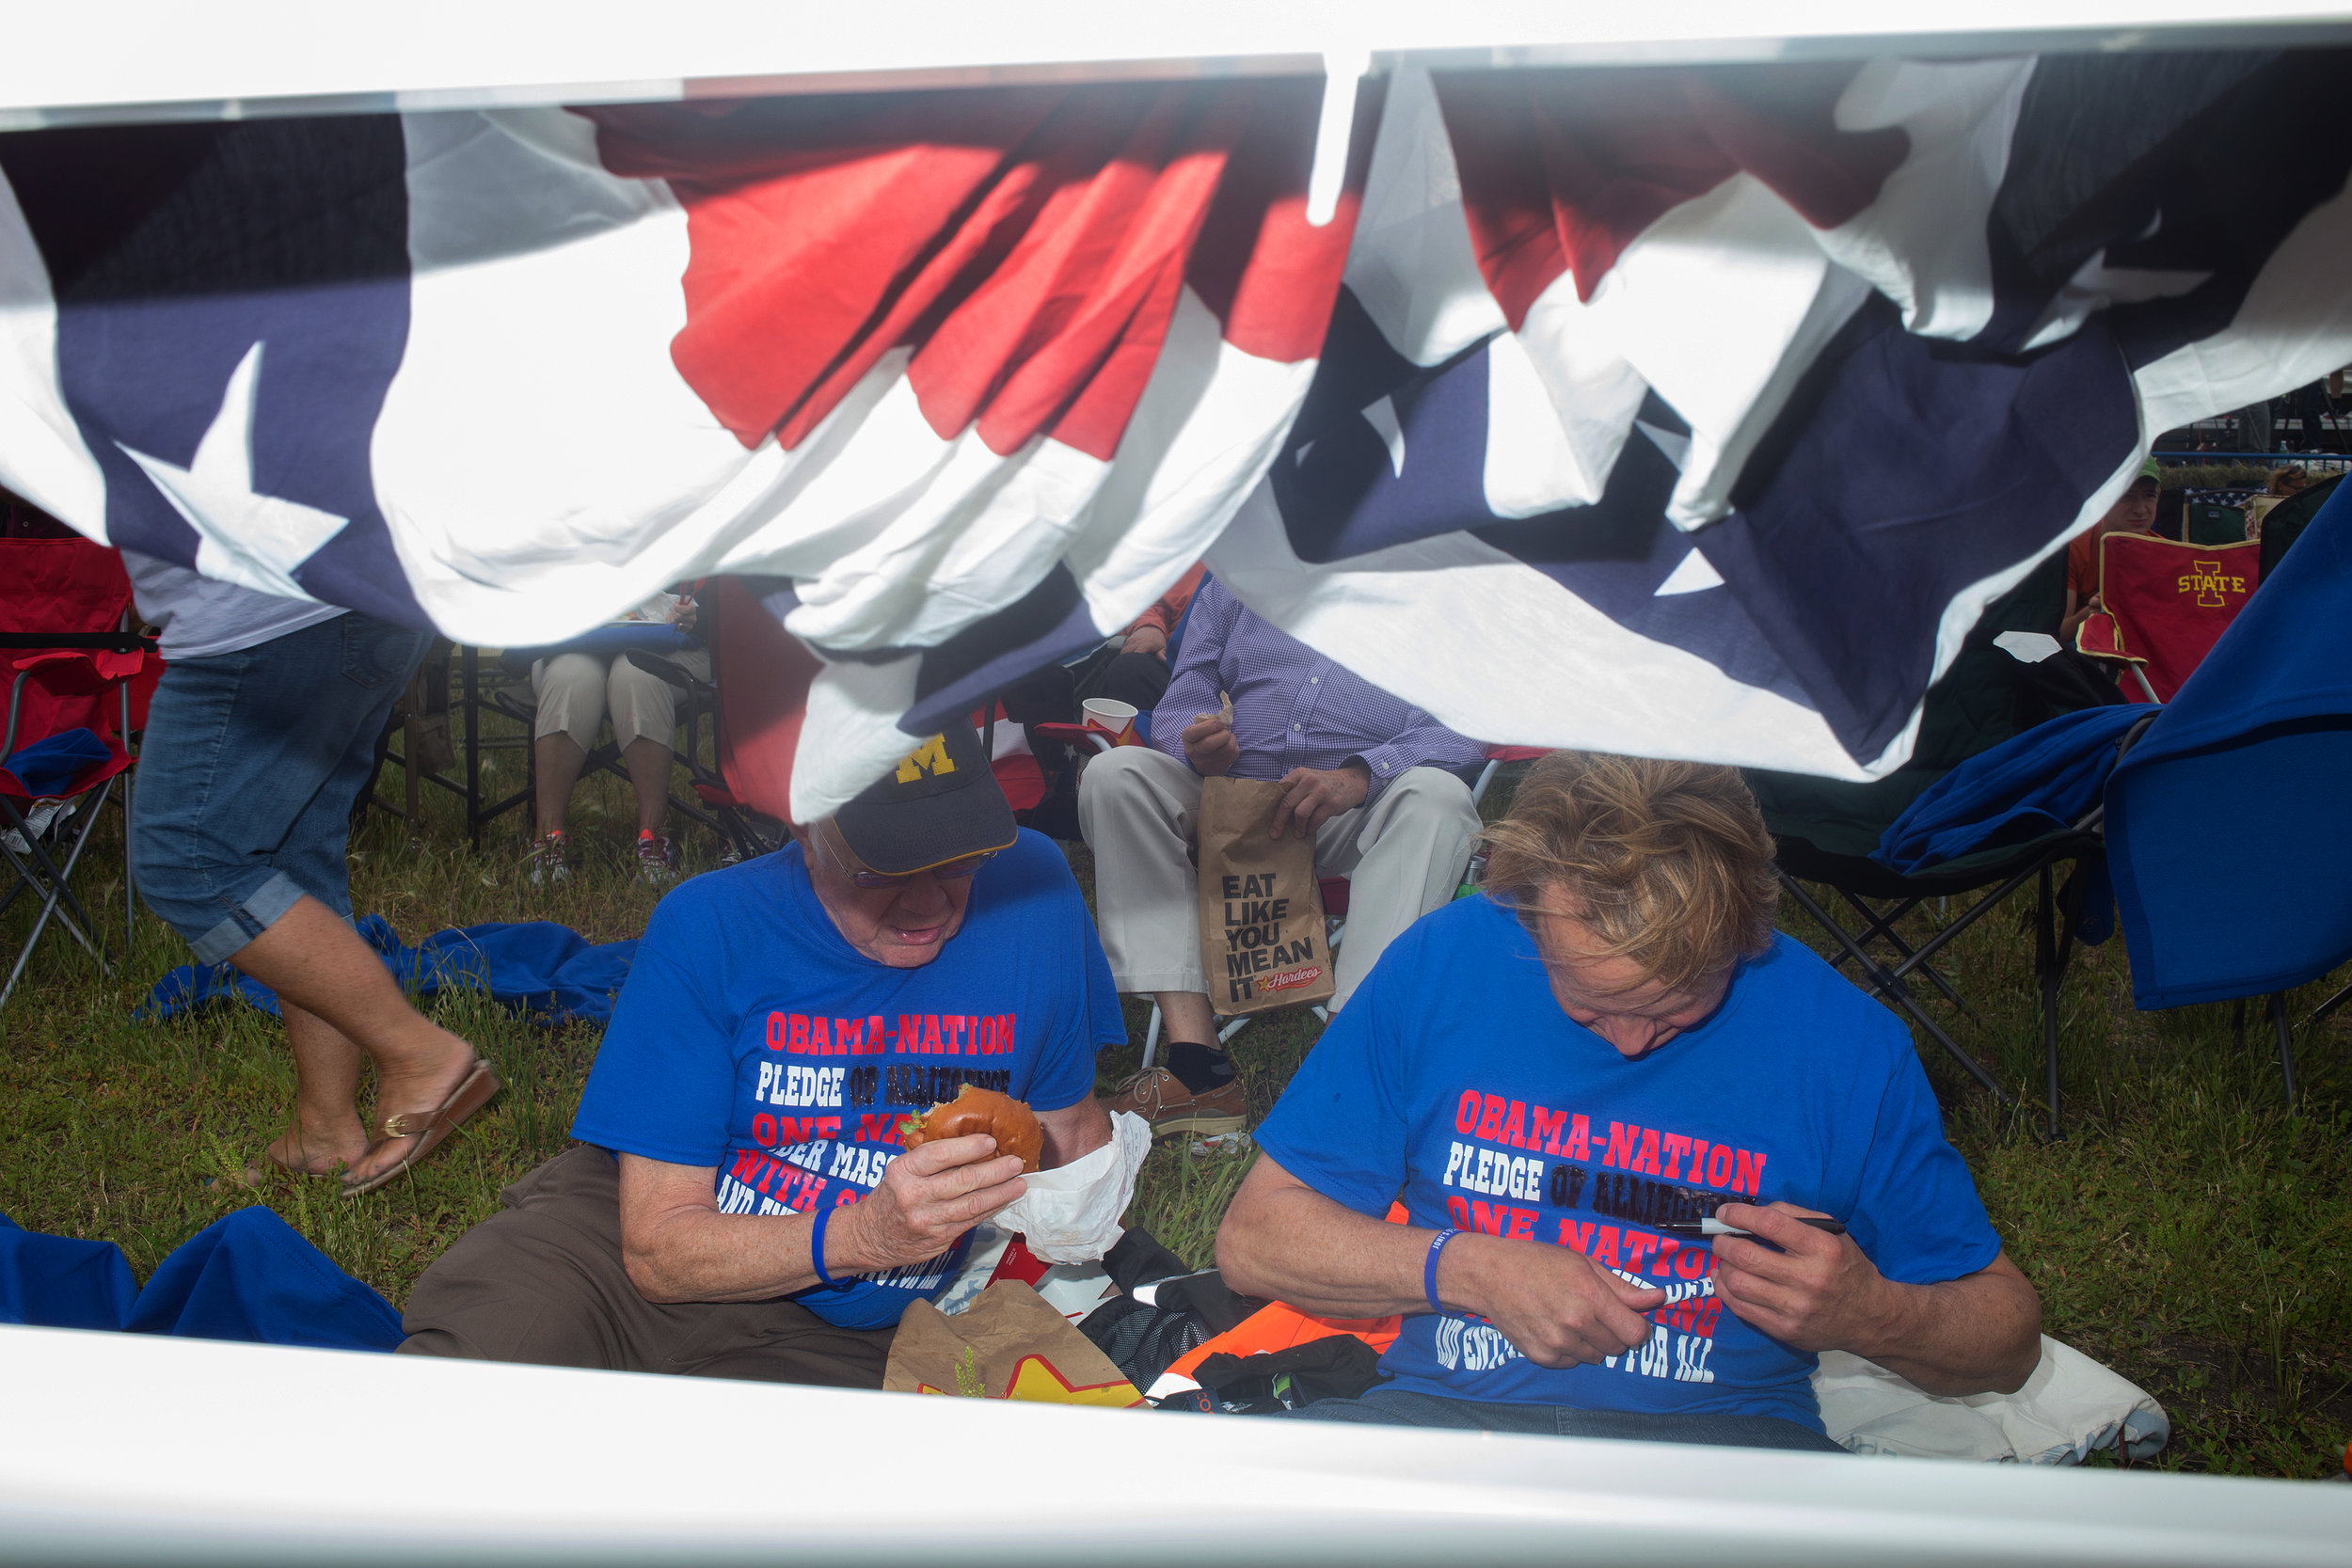  Attendees fix a spelling error on their shirts at Senator Joni Ernst's First Annual Roast &amp; Ride on June 6, 2015 in Boone, Iowa.  